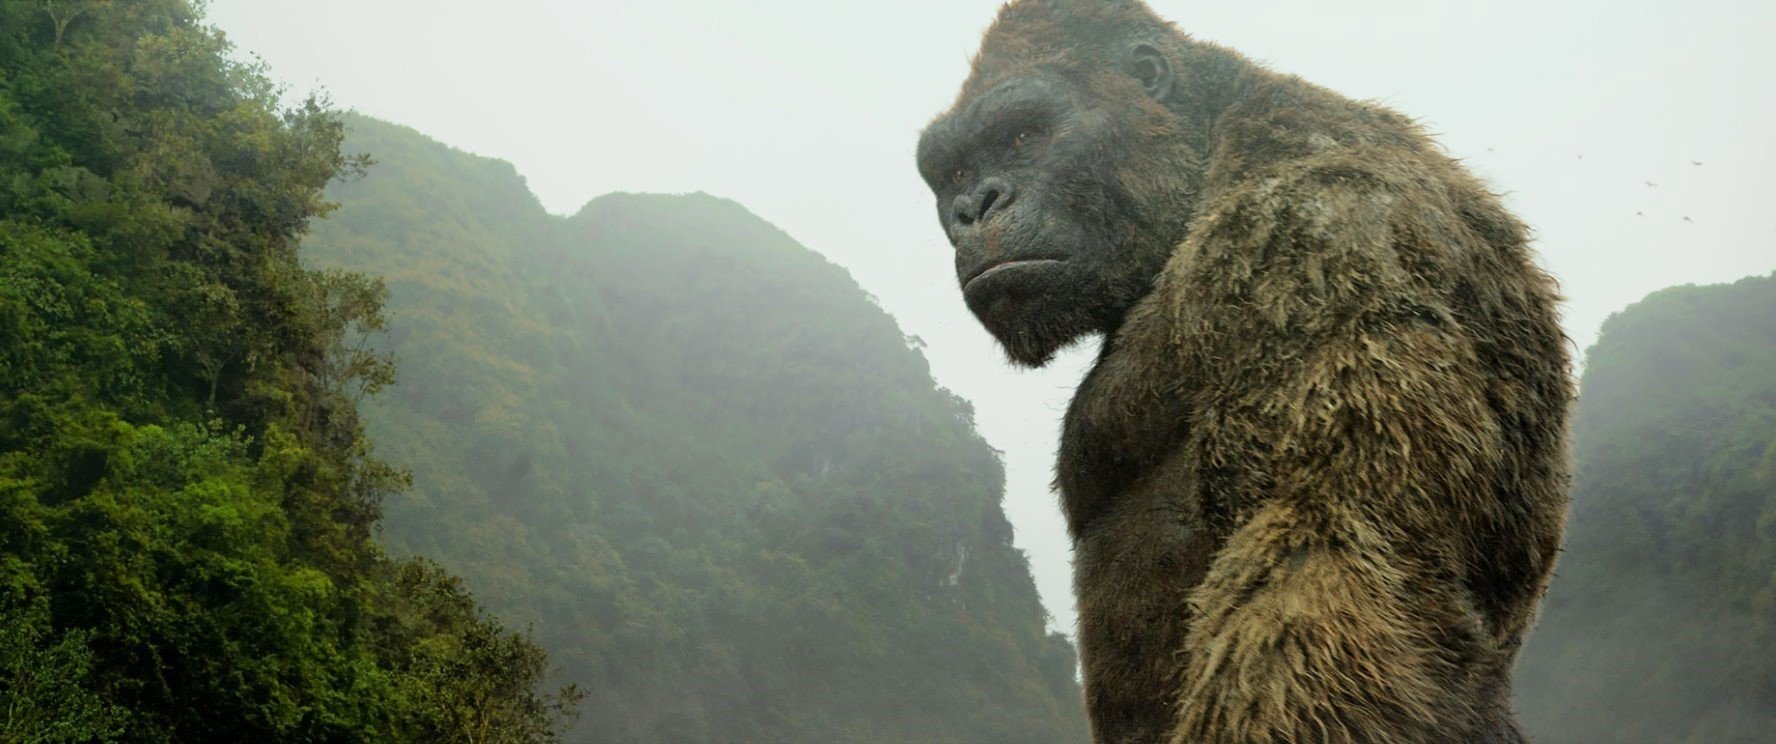 Kong from Warner Bros. Pictures' Kong: Skull Island (2017)